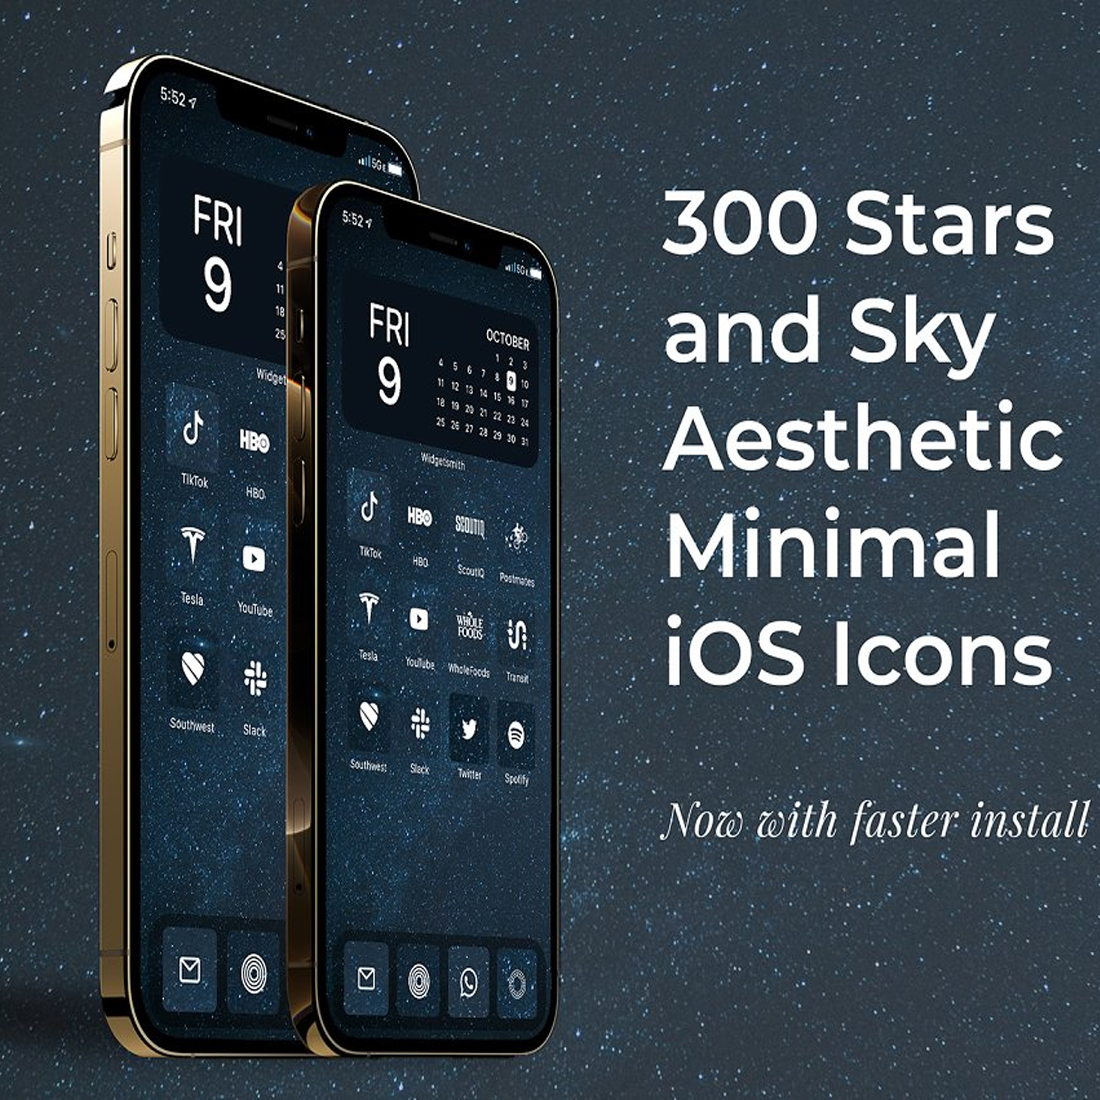 Images preview 300 stars night sky ios 14 icons.